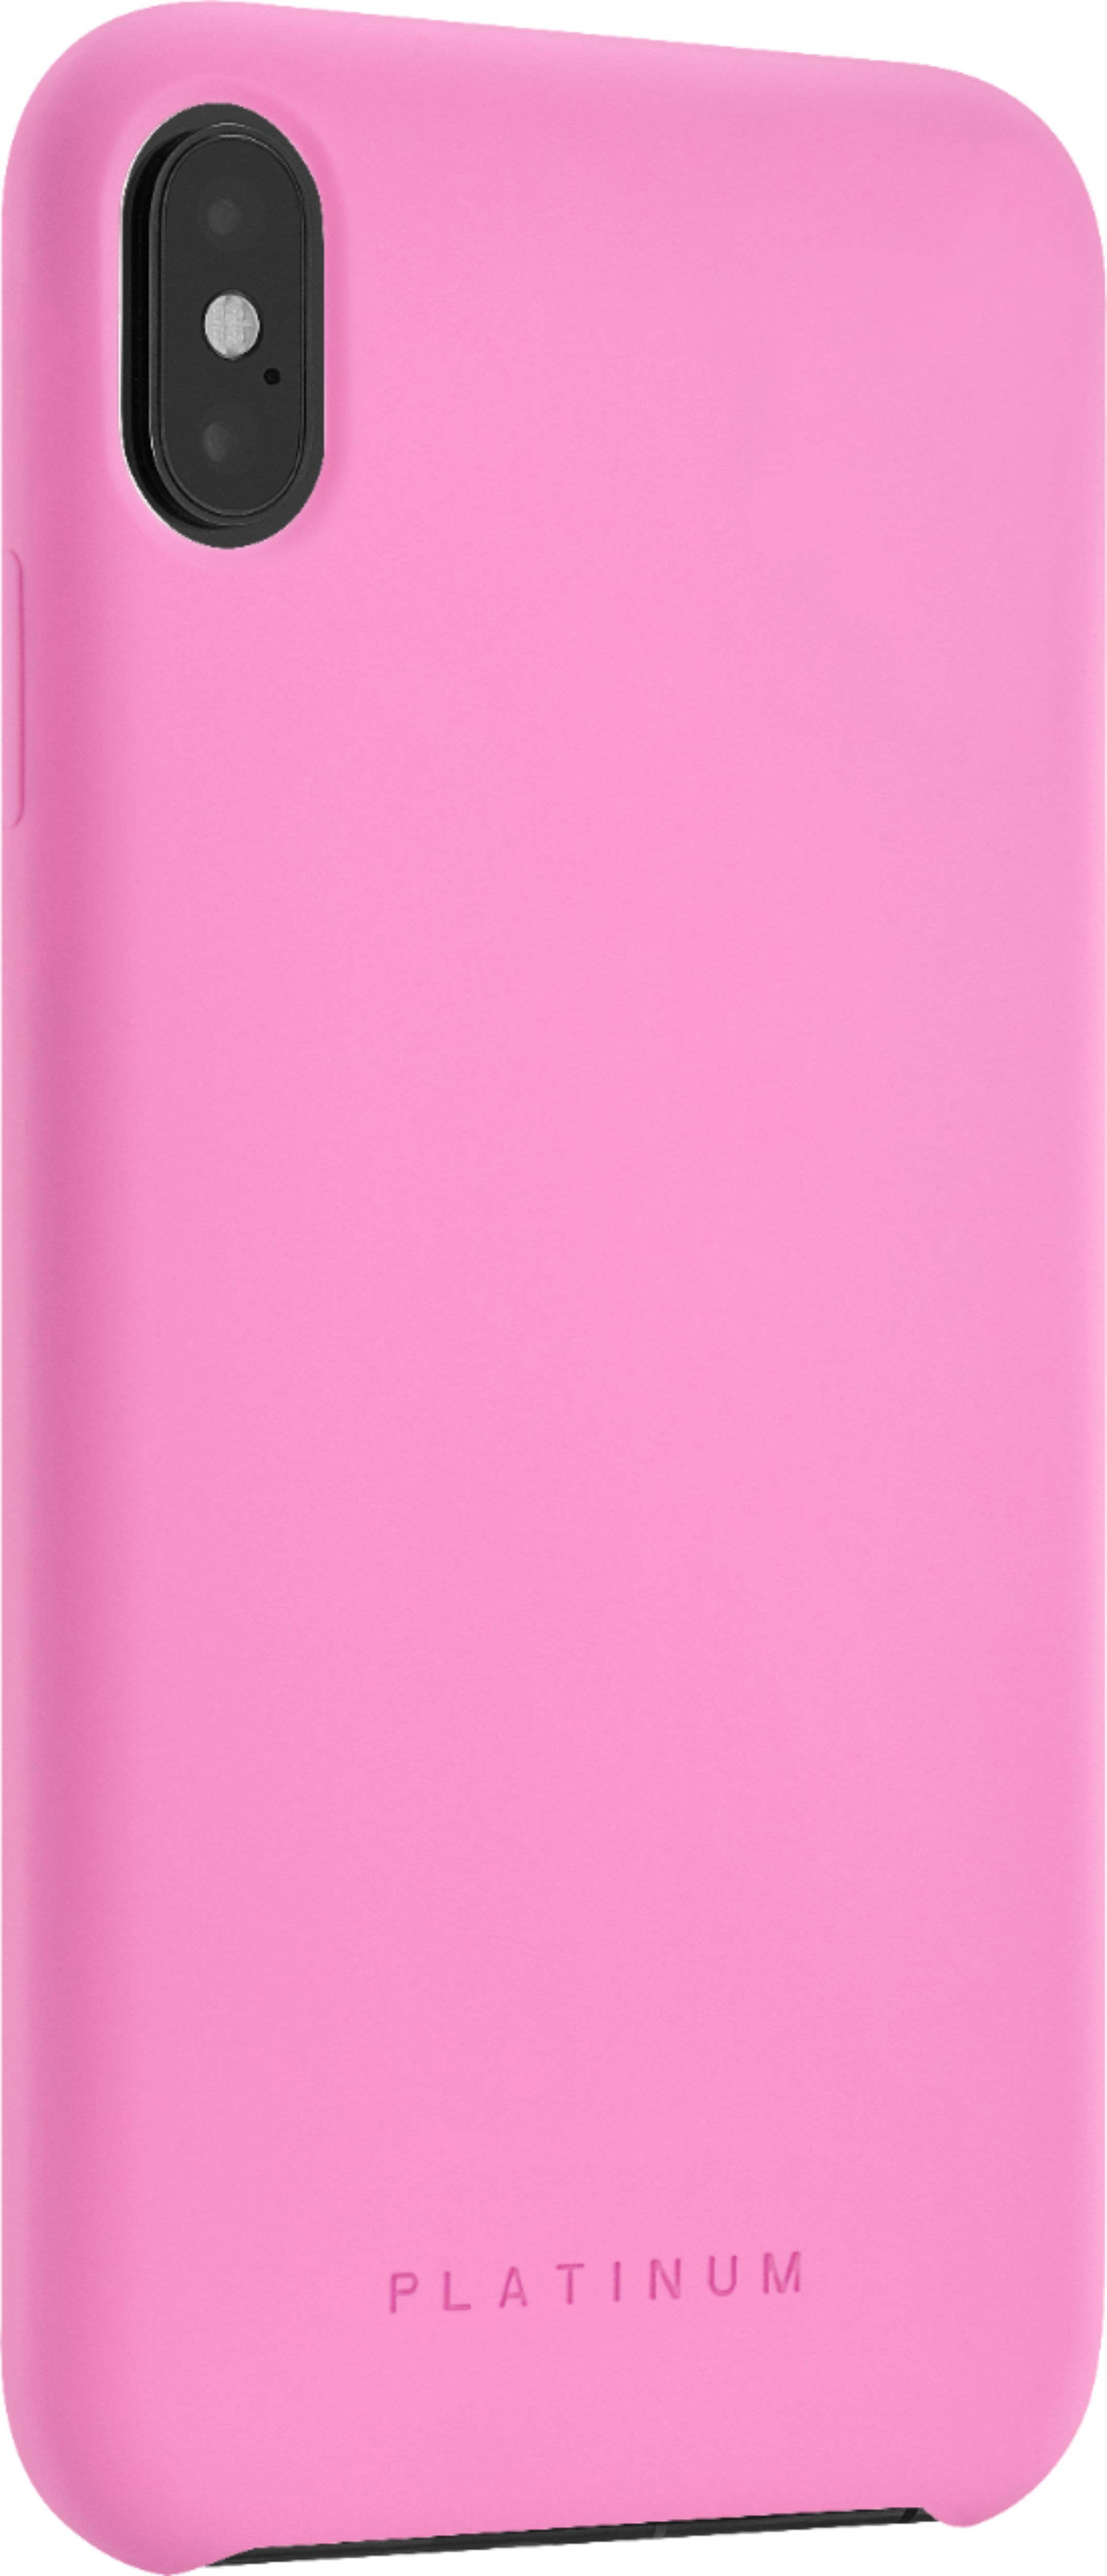 Platinum Silicone Case For Apple Iphone Xs Max Hot Pink Pt Maxllsp Best Buy